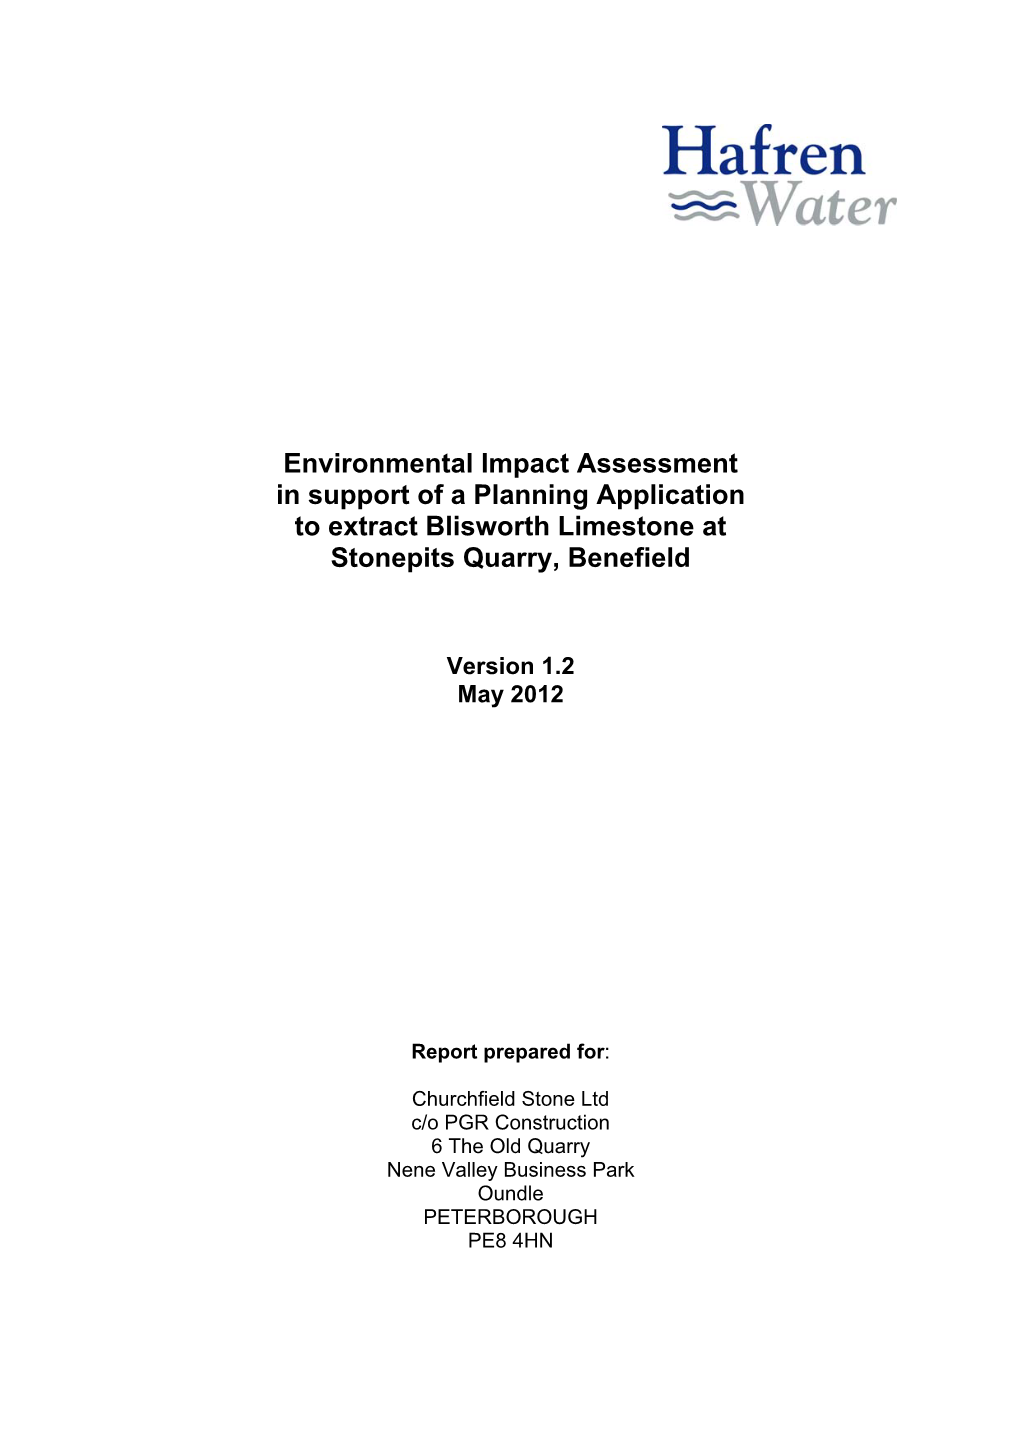 Environmental Impact Assessment in Support of a Planning Application to Extract Blisworth Limestone at Stonepits Quarry, Benefield